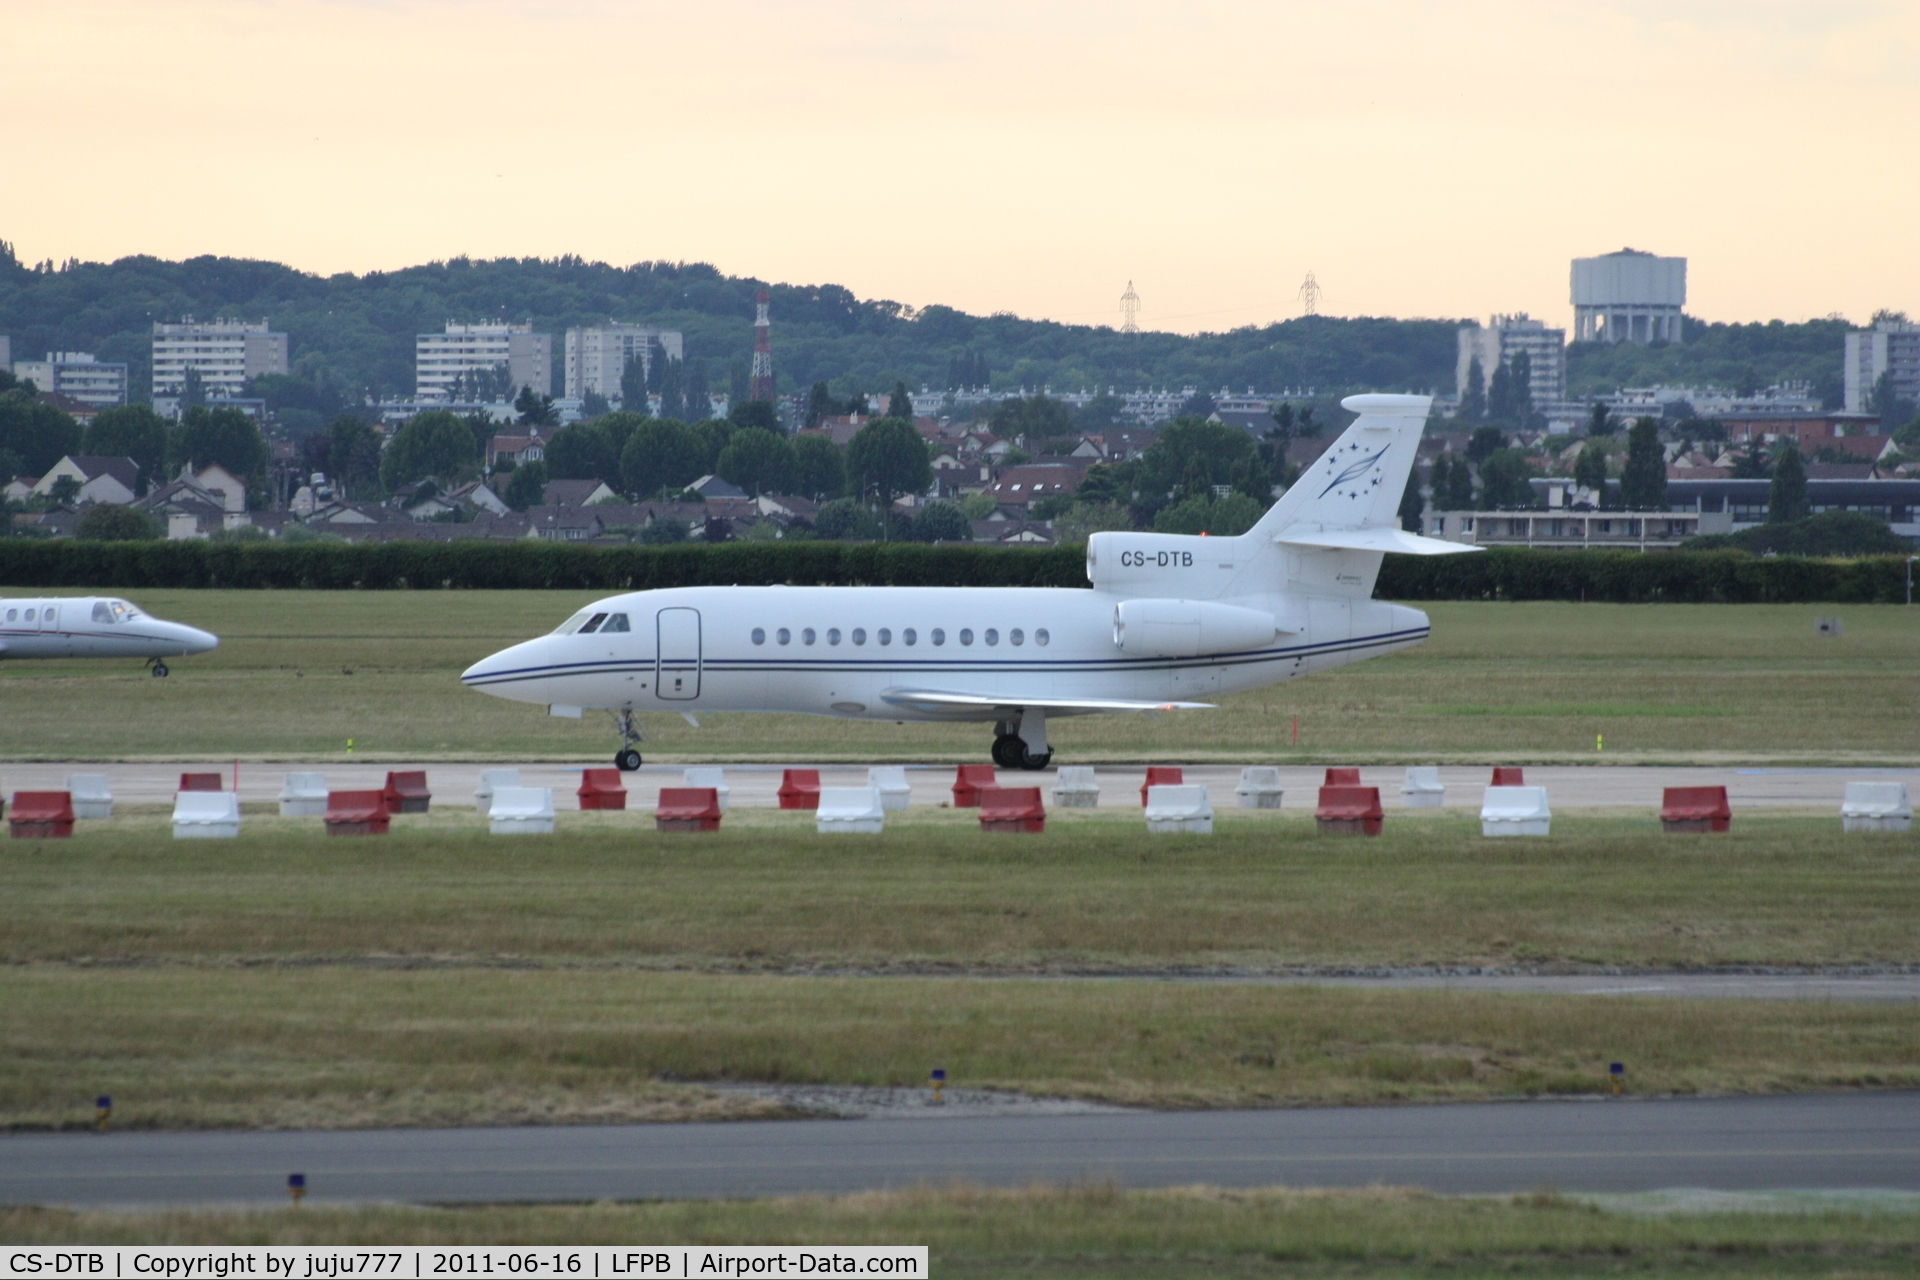 CS-DTB, 1997 Dassault Falcon 900EX C/N 11, on transit at Le Bourget